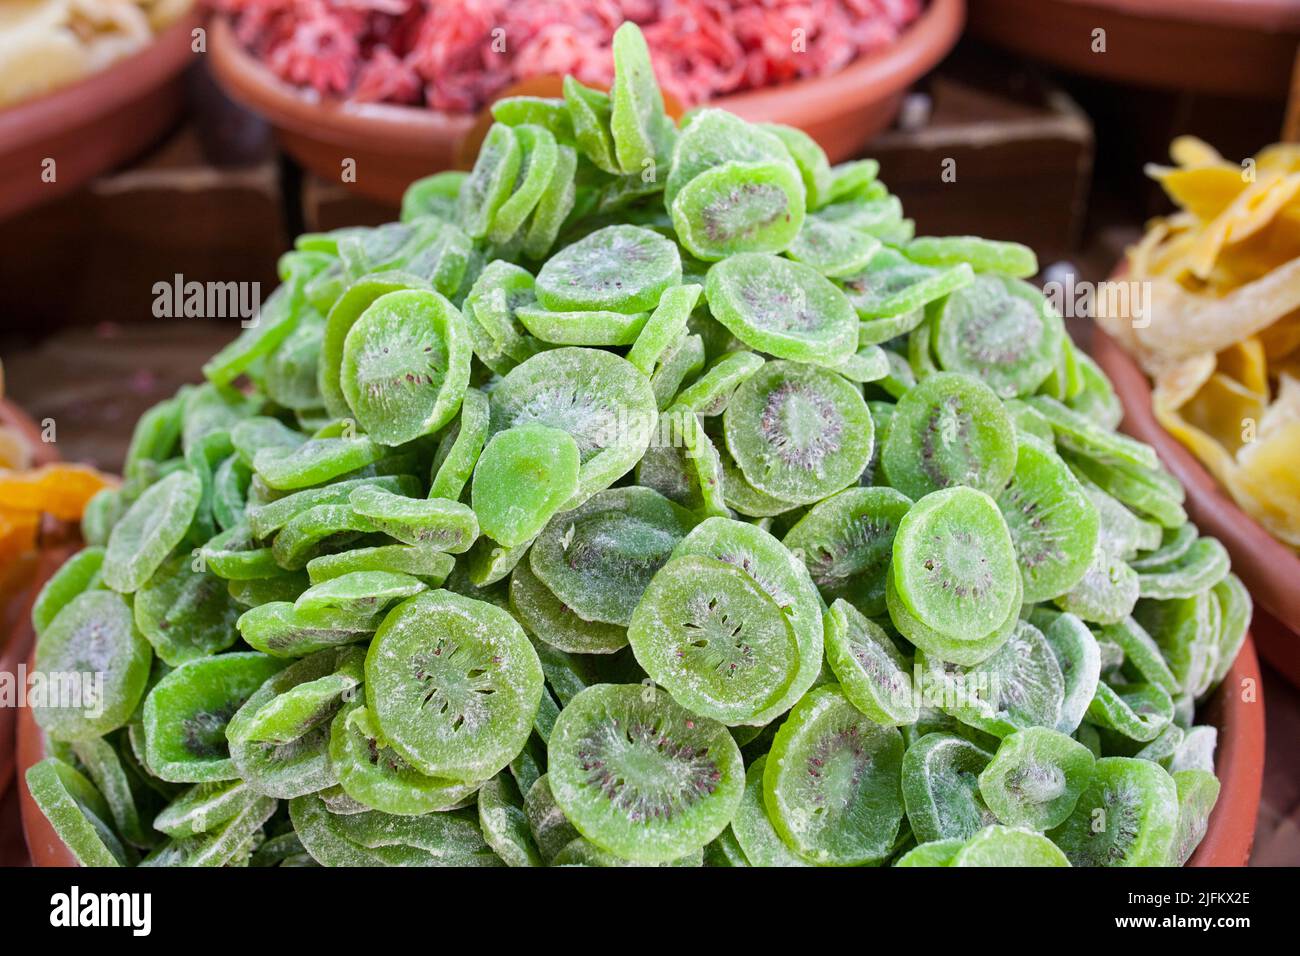 Bowl with dried kiwifruit. Slices displayed at street market stall. Stock Photo